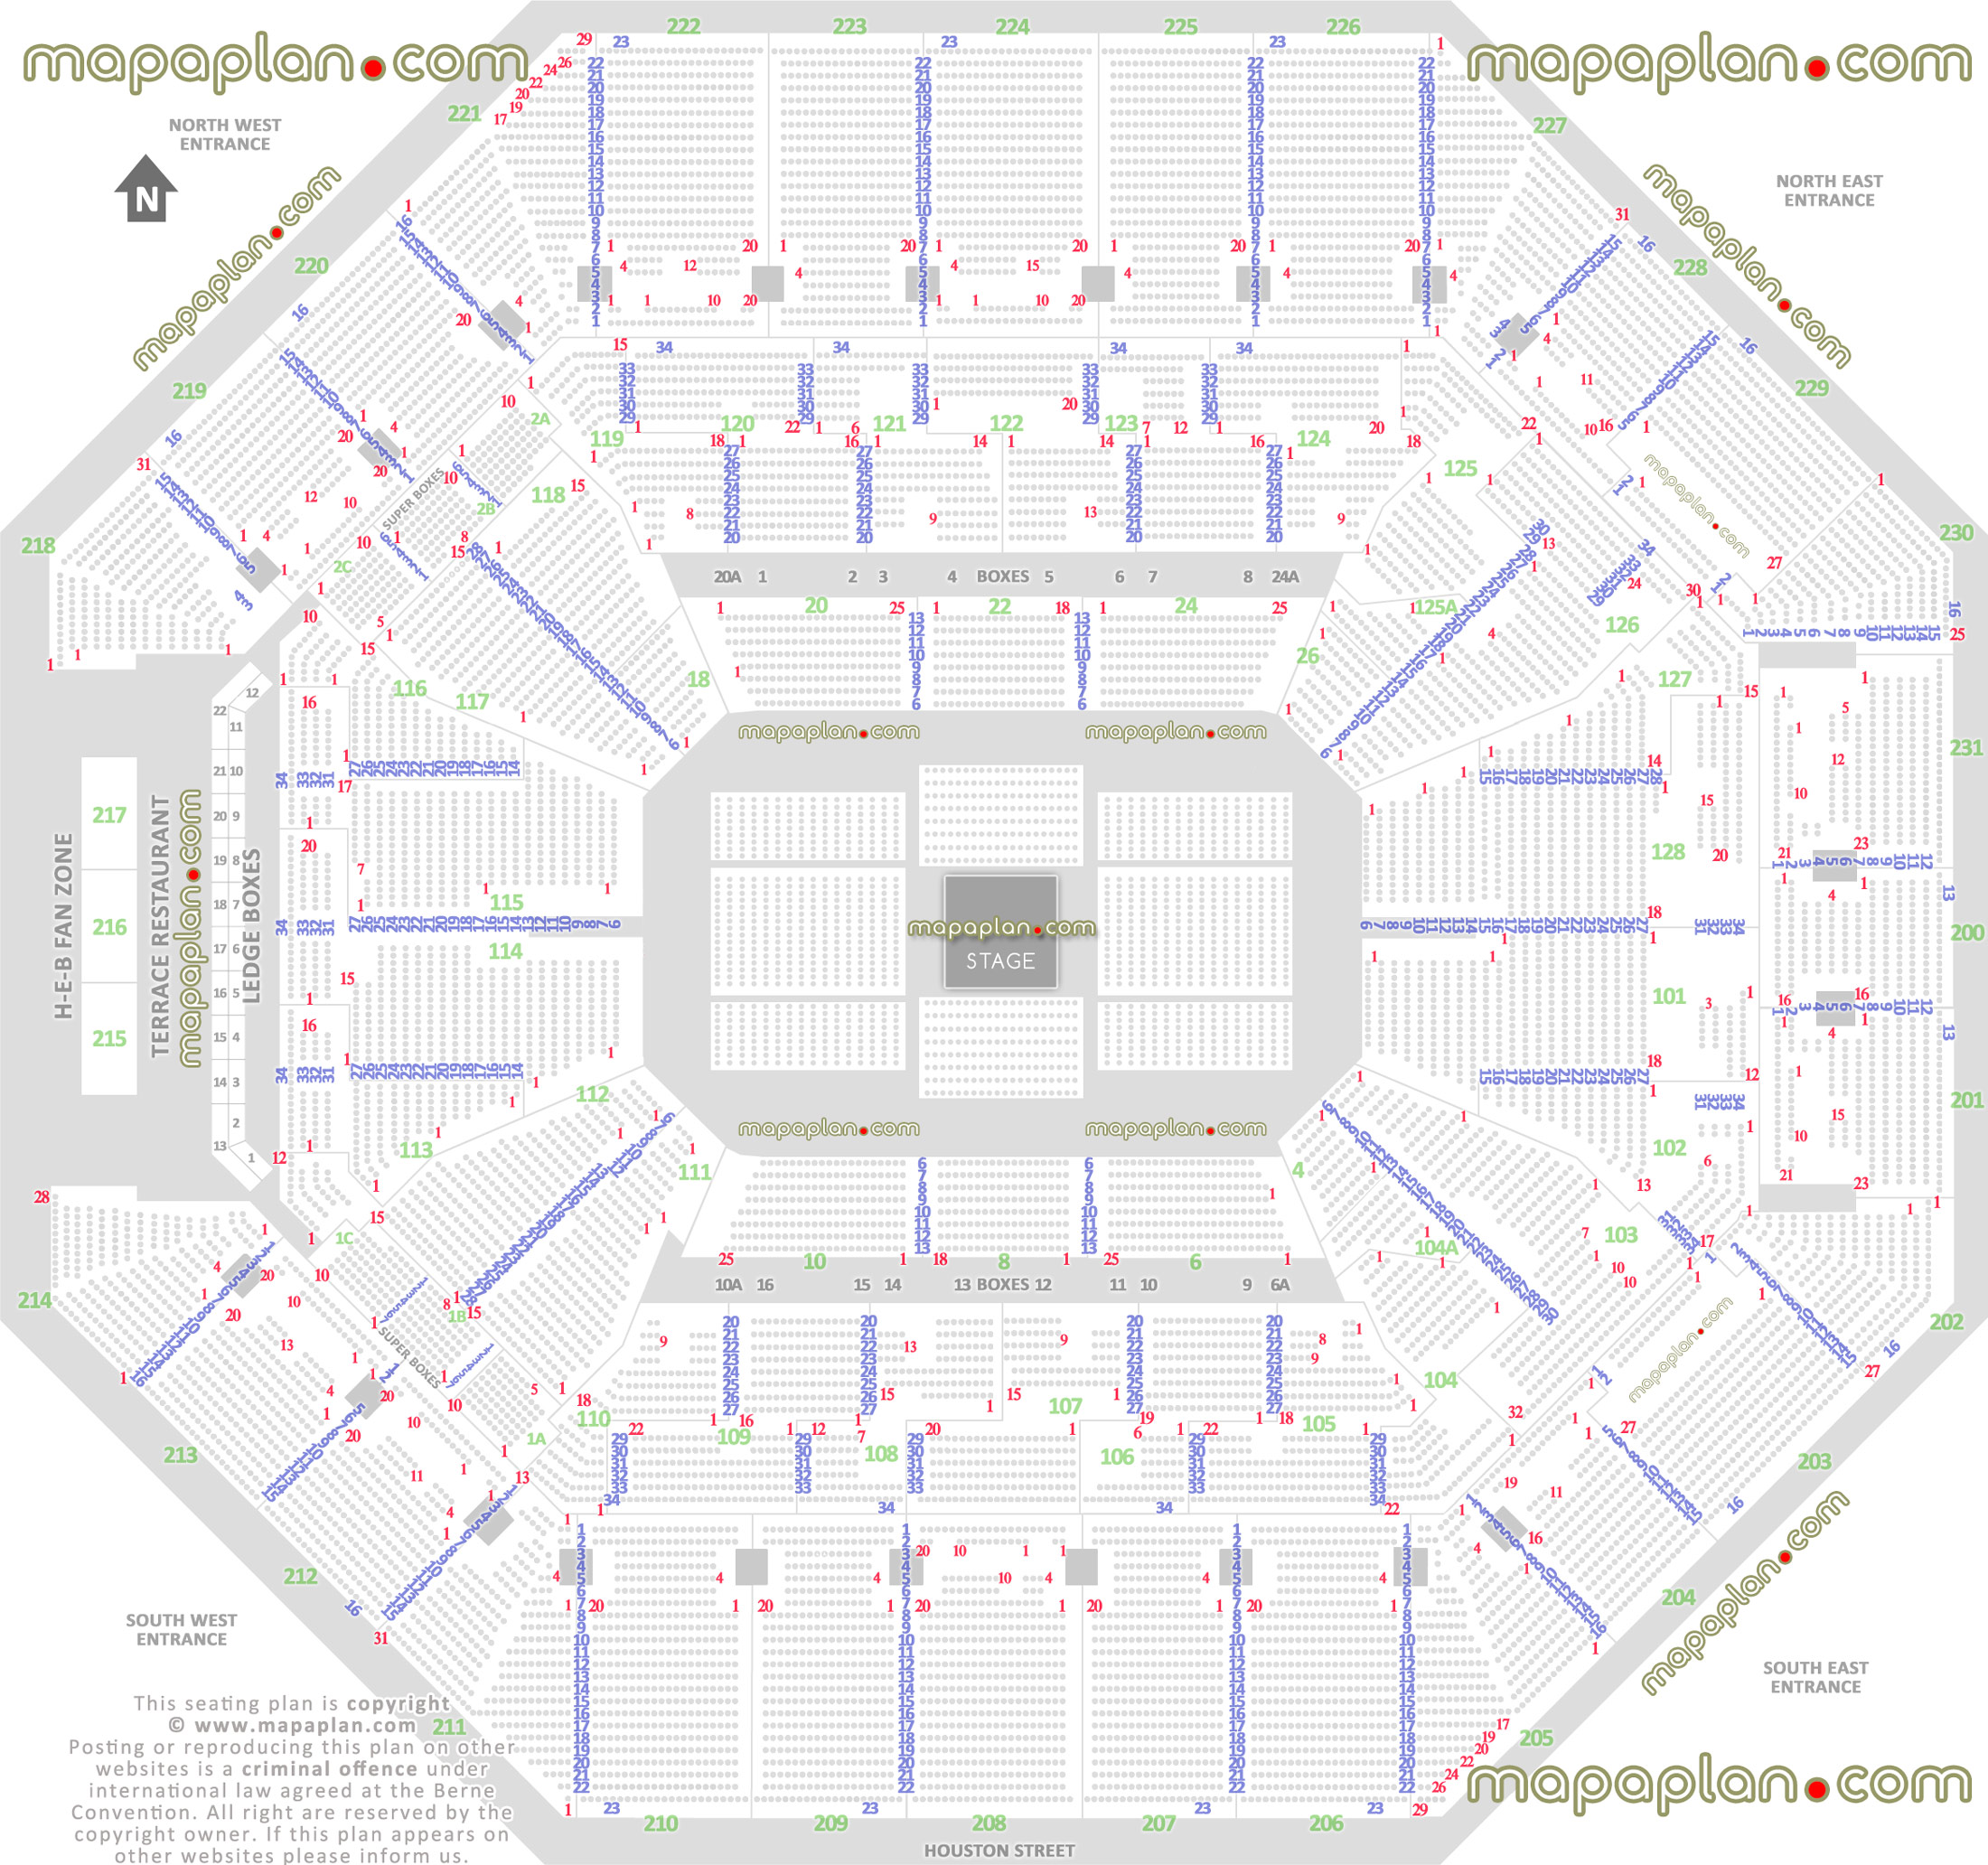 concert stage round 360 degree arrangement how many seats row balcony sections 201 202 203 204 205 206 207 208 209 210 211 212 213 214 215 216 217 218 219 220 221 222 223 224 225 226 227 228 229 230 San Antonio AT&T Center seating chart